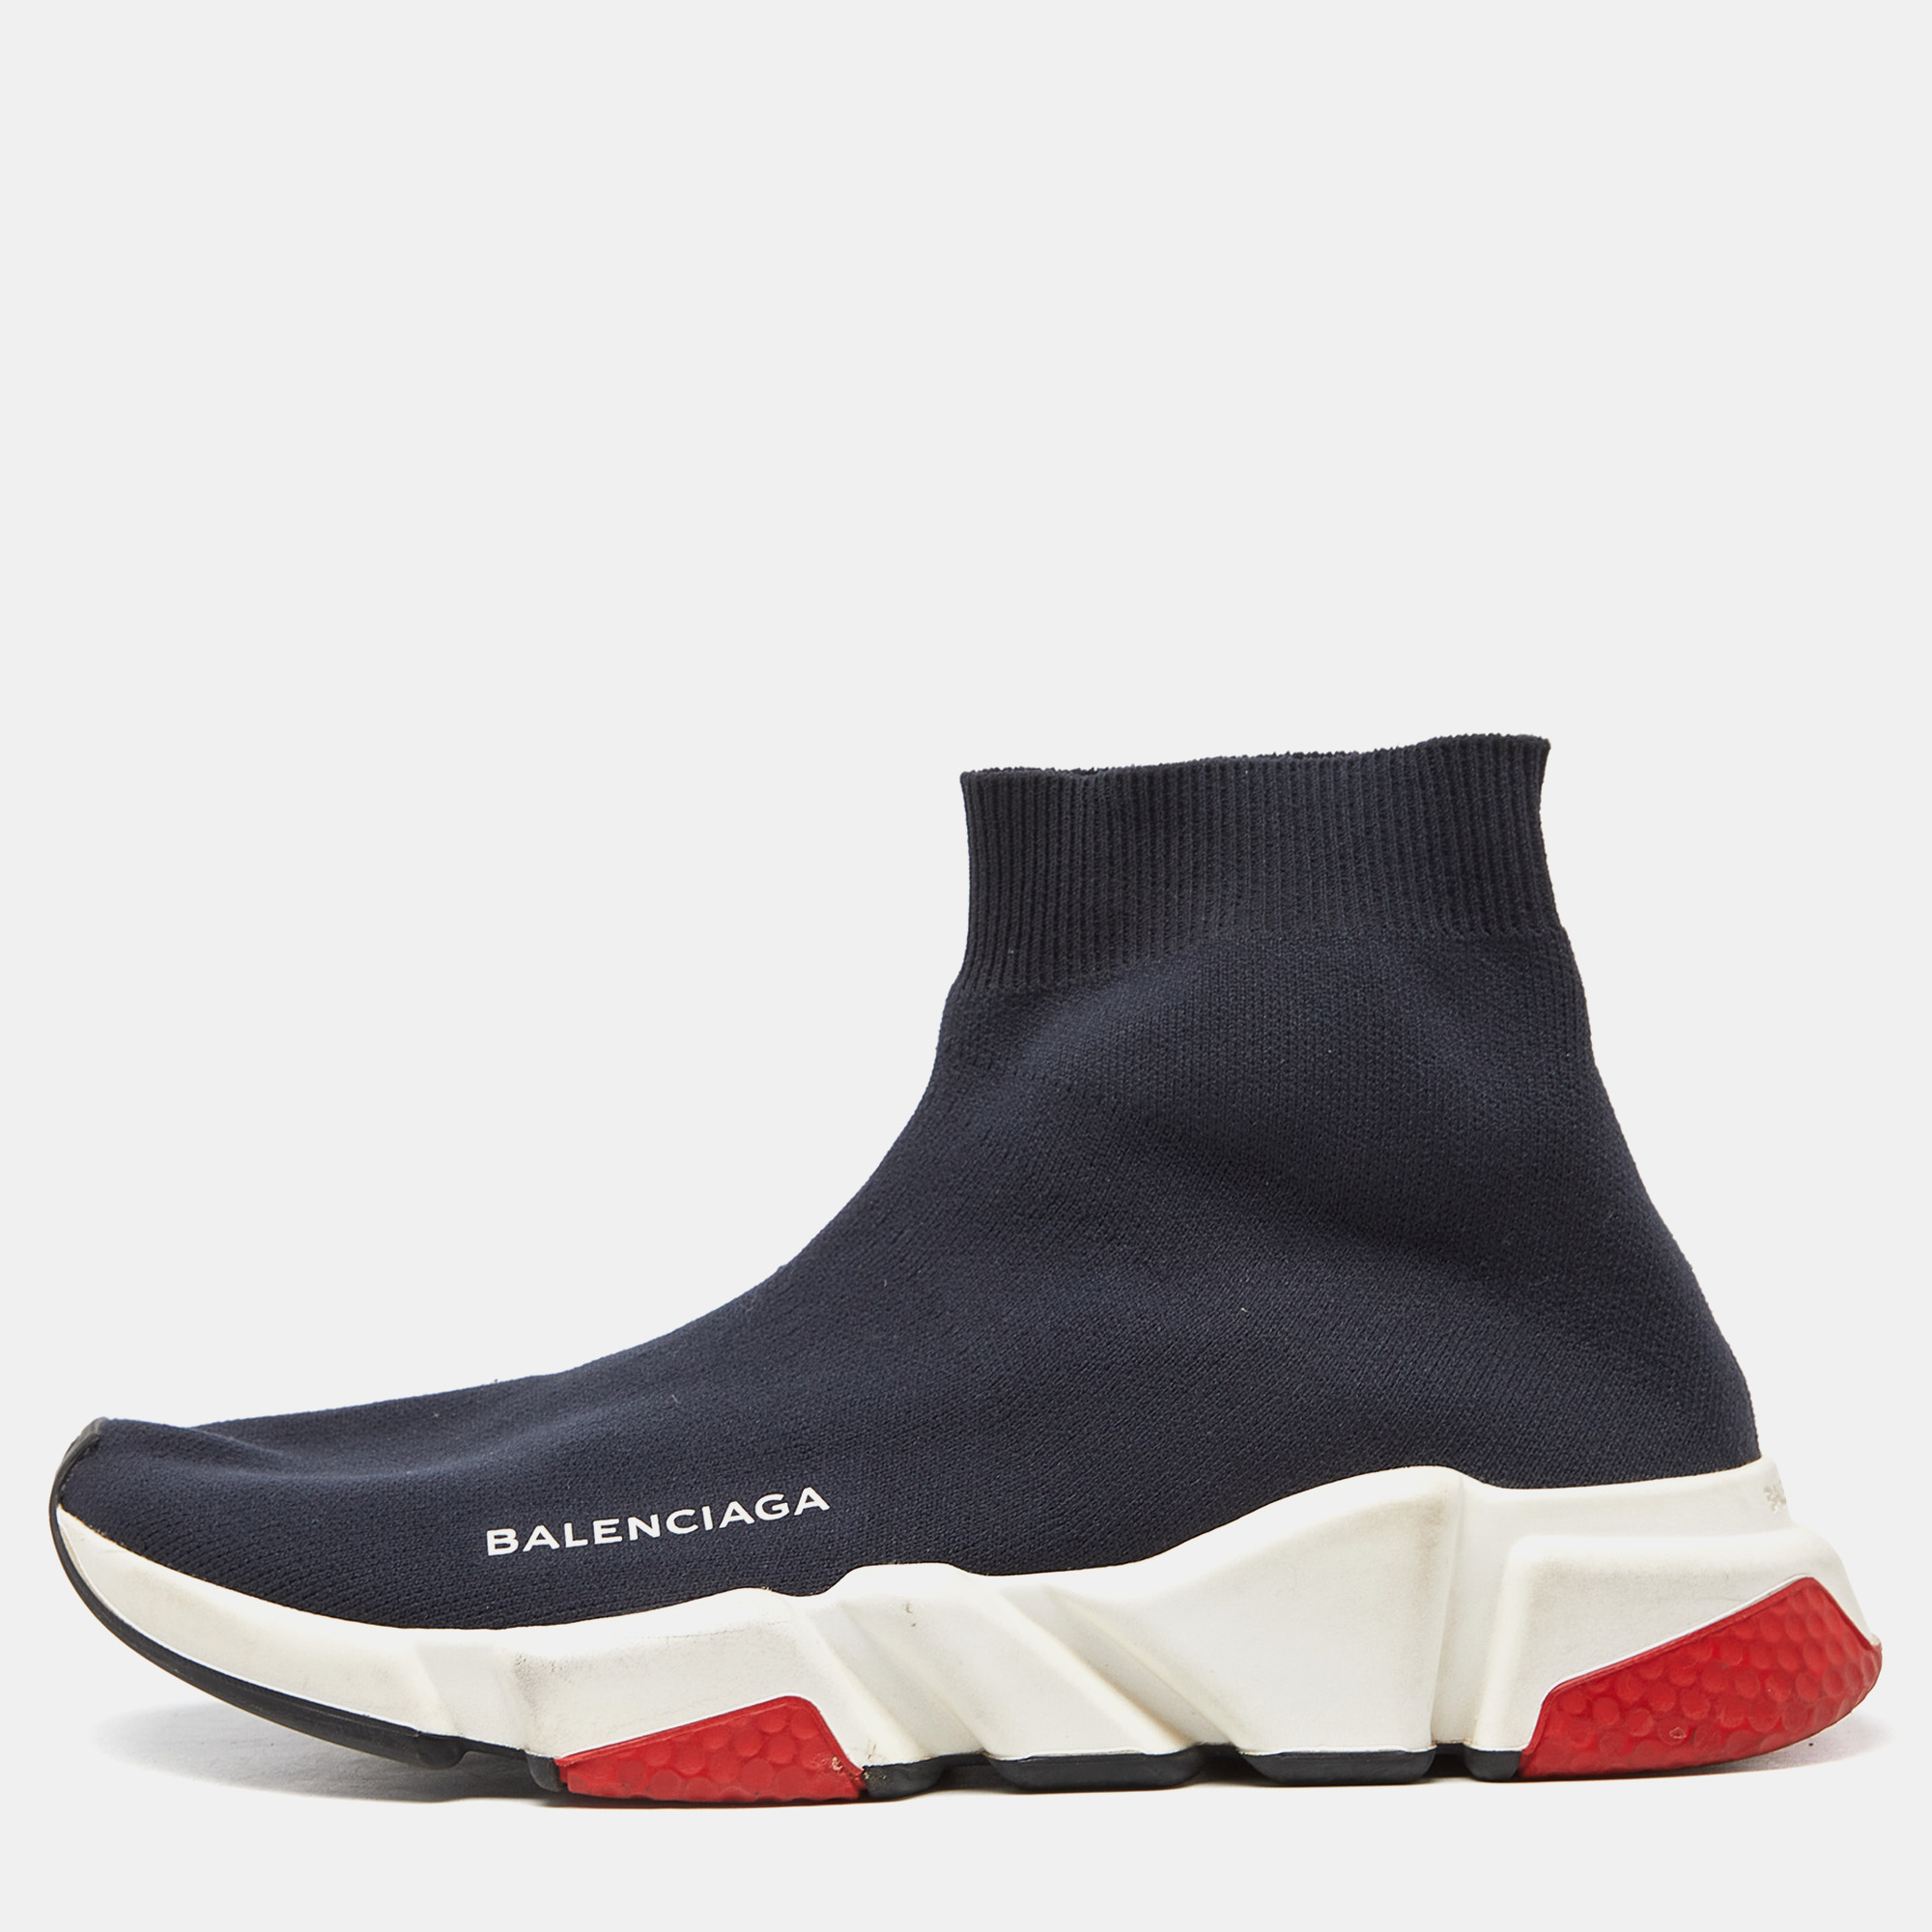 Celebrating the fusion of sports and luxury fashion these Balenciaga Speed Trainer sneakers are absolutely worth the splurge. They are laceless and crafted well in a sock like silhouette. Fully equipped to give you the best experience this shimmery logo detailed knit fabric pair deserves to be yours